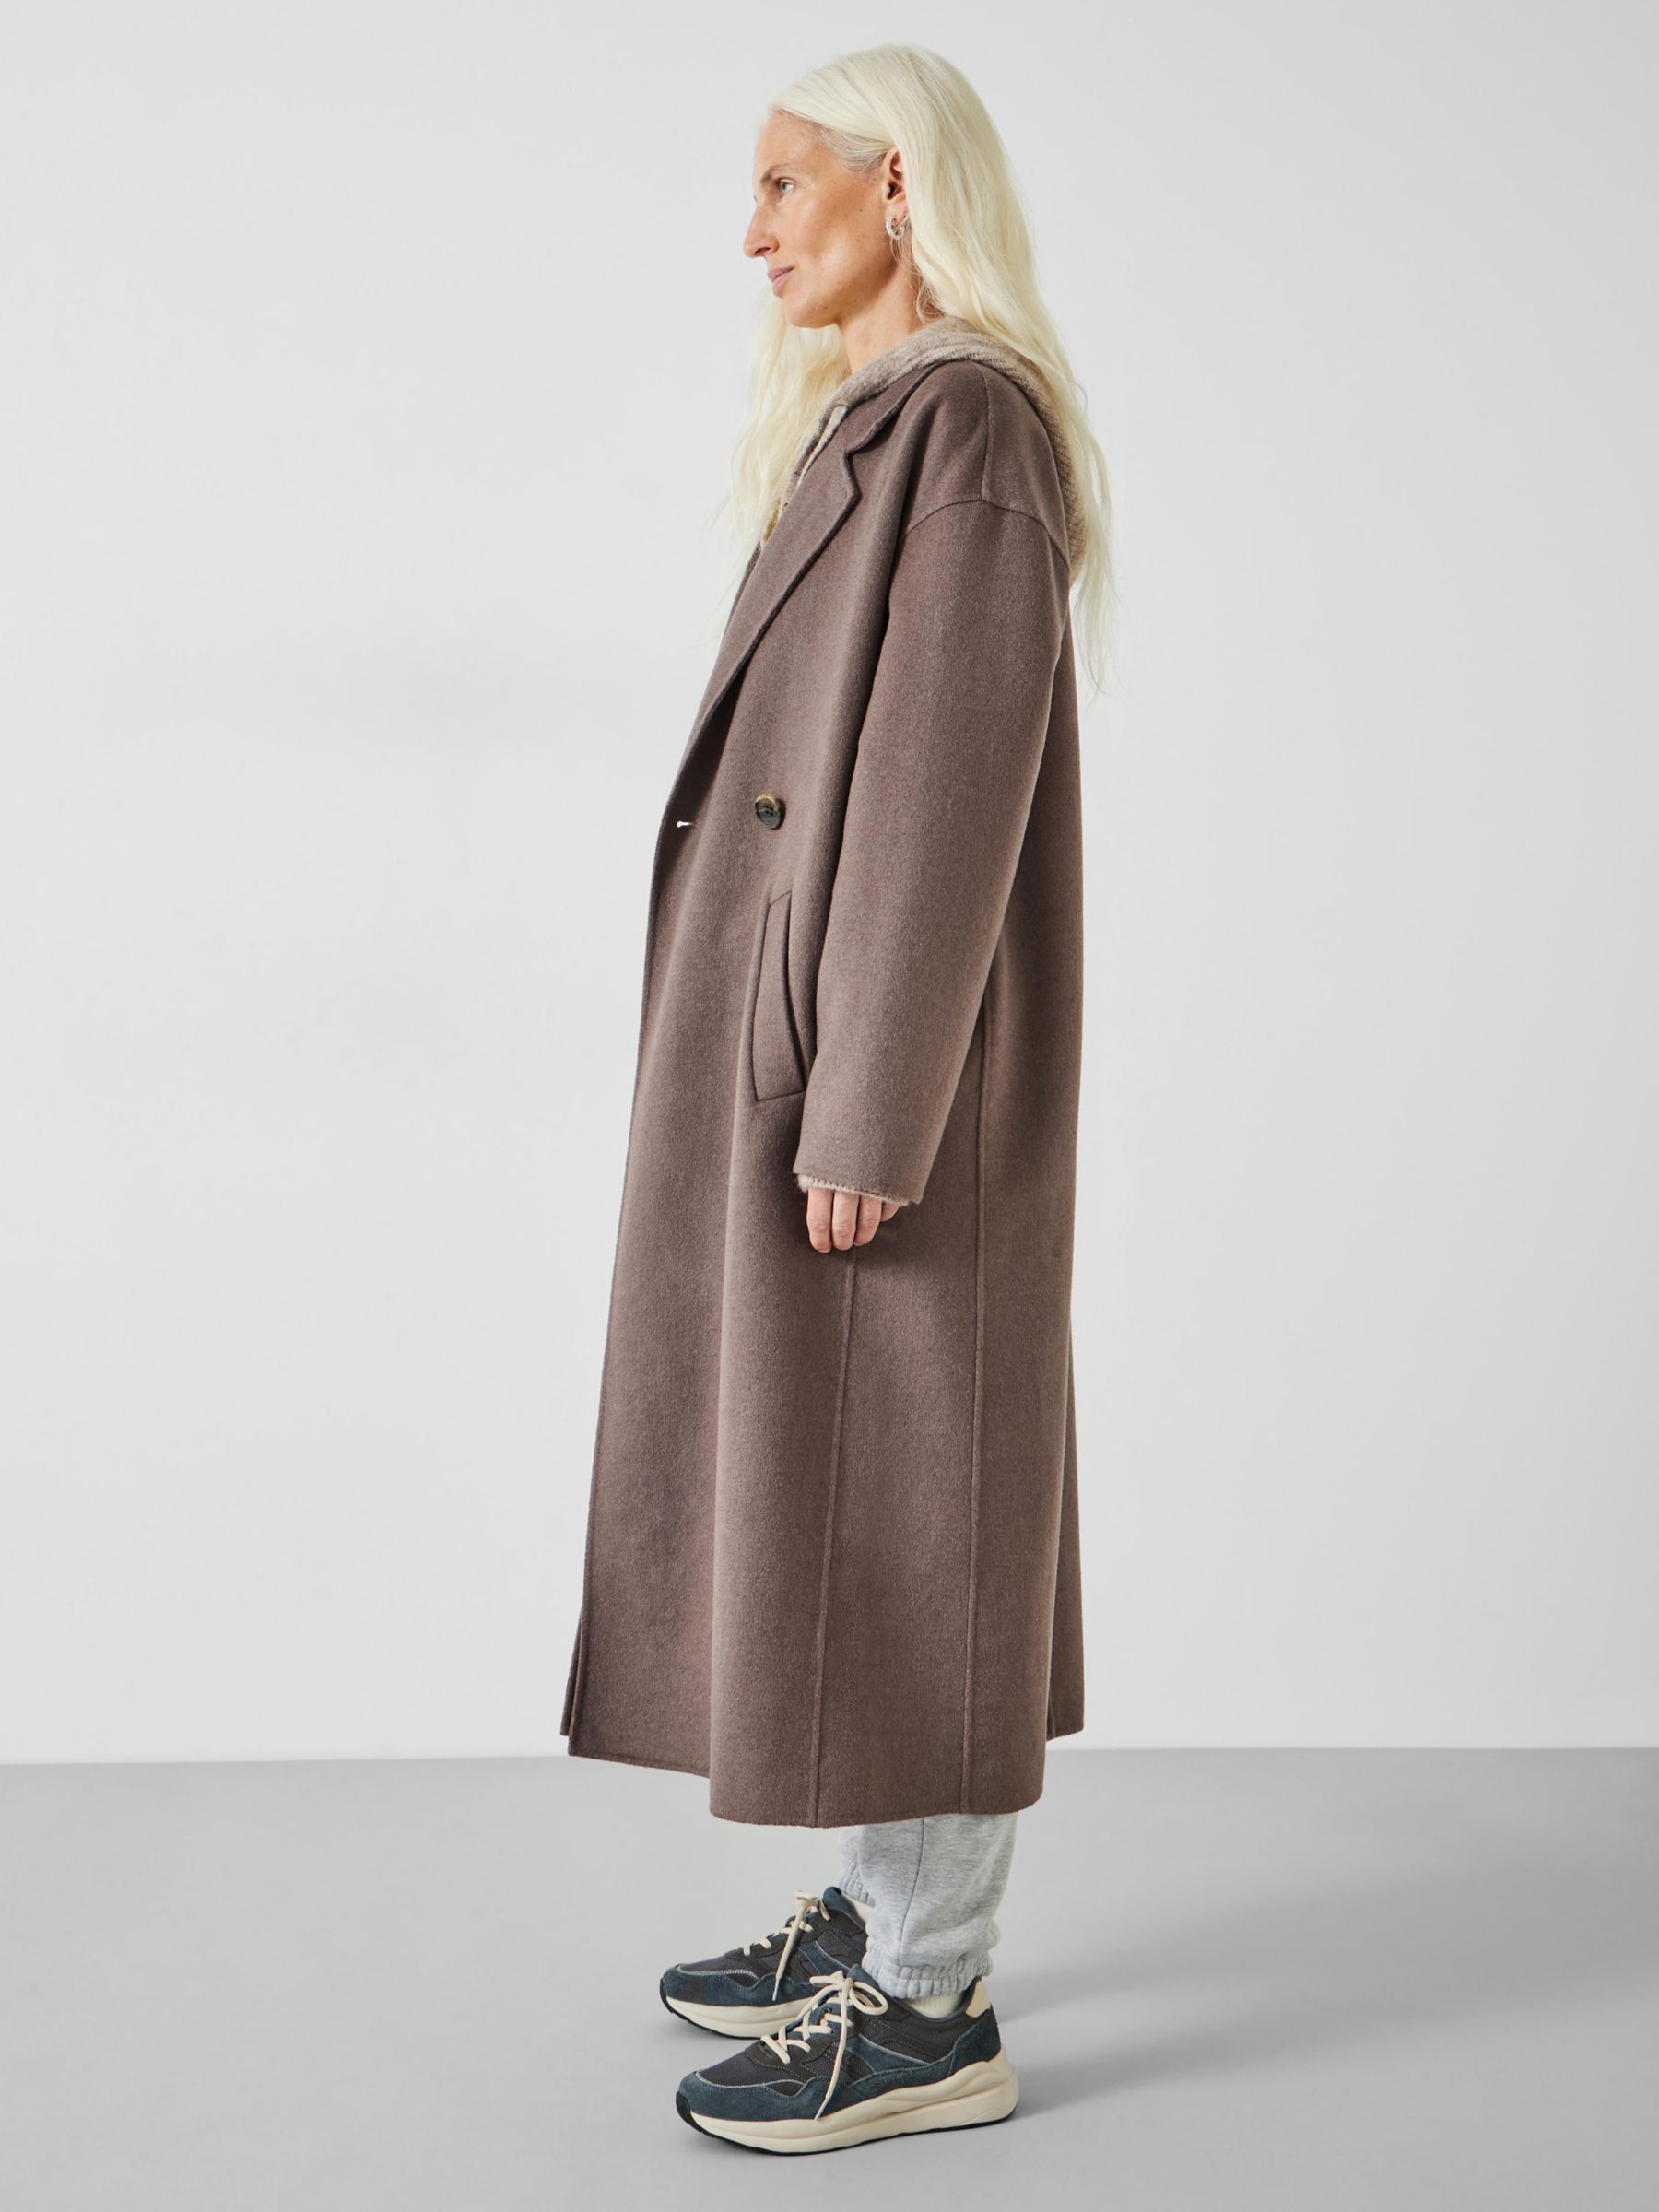 Buy HUSH Iris Relaxed Double Faced Wool Blend Coat Online at johnlewis.com